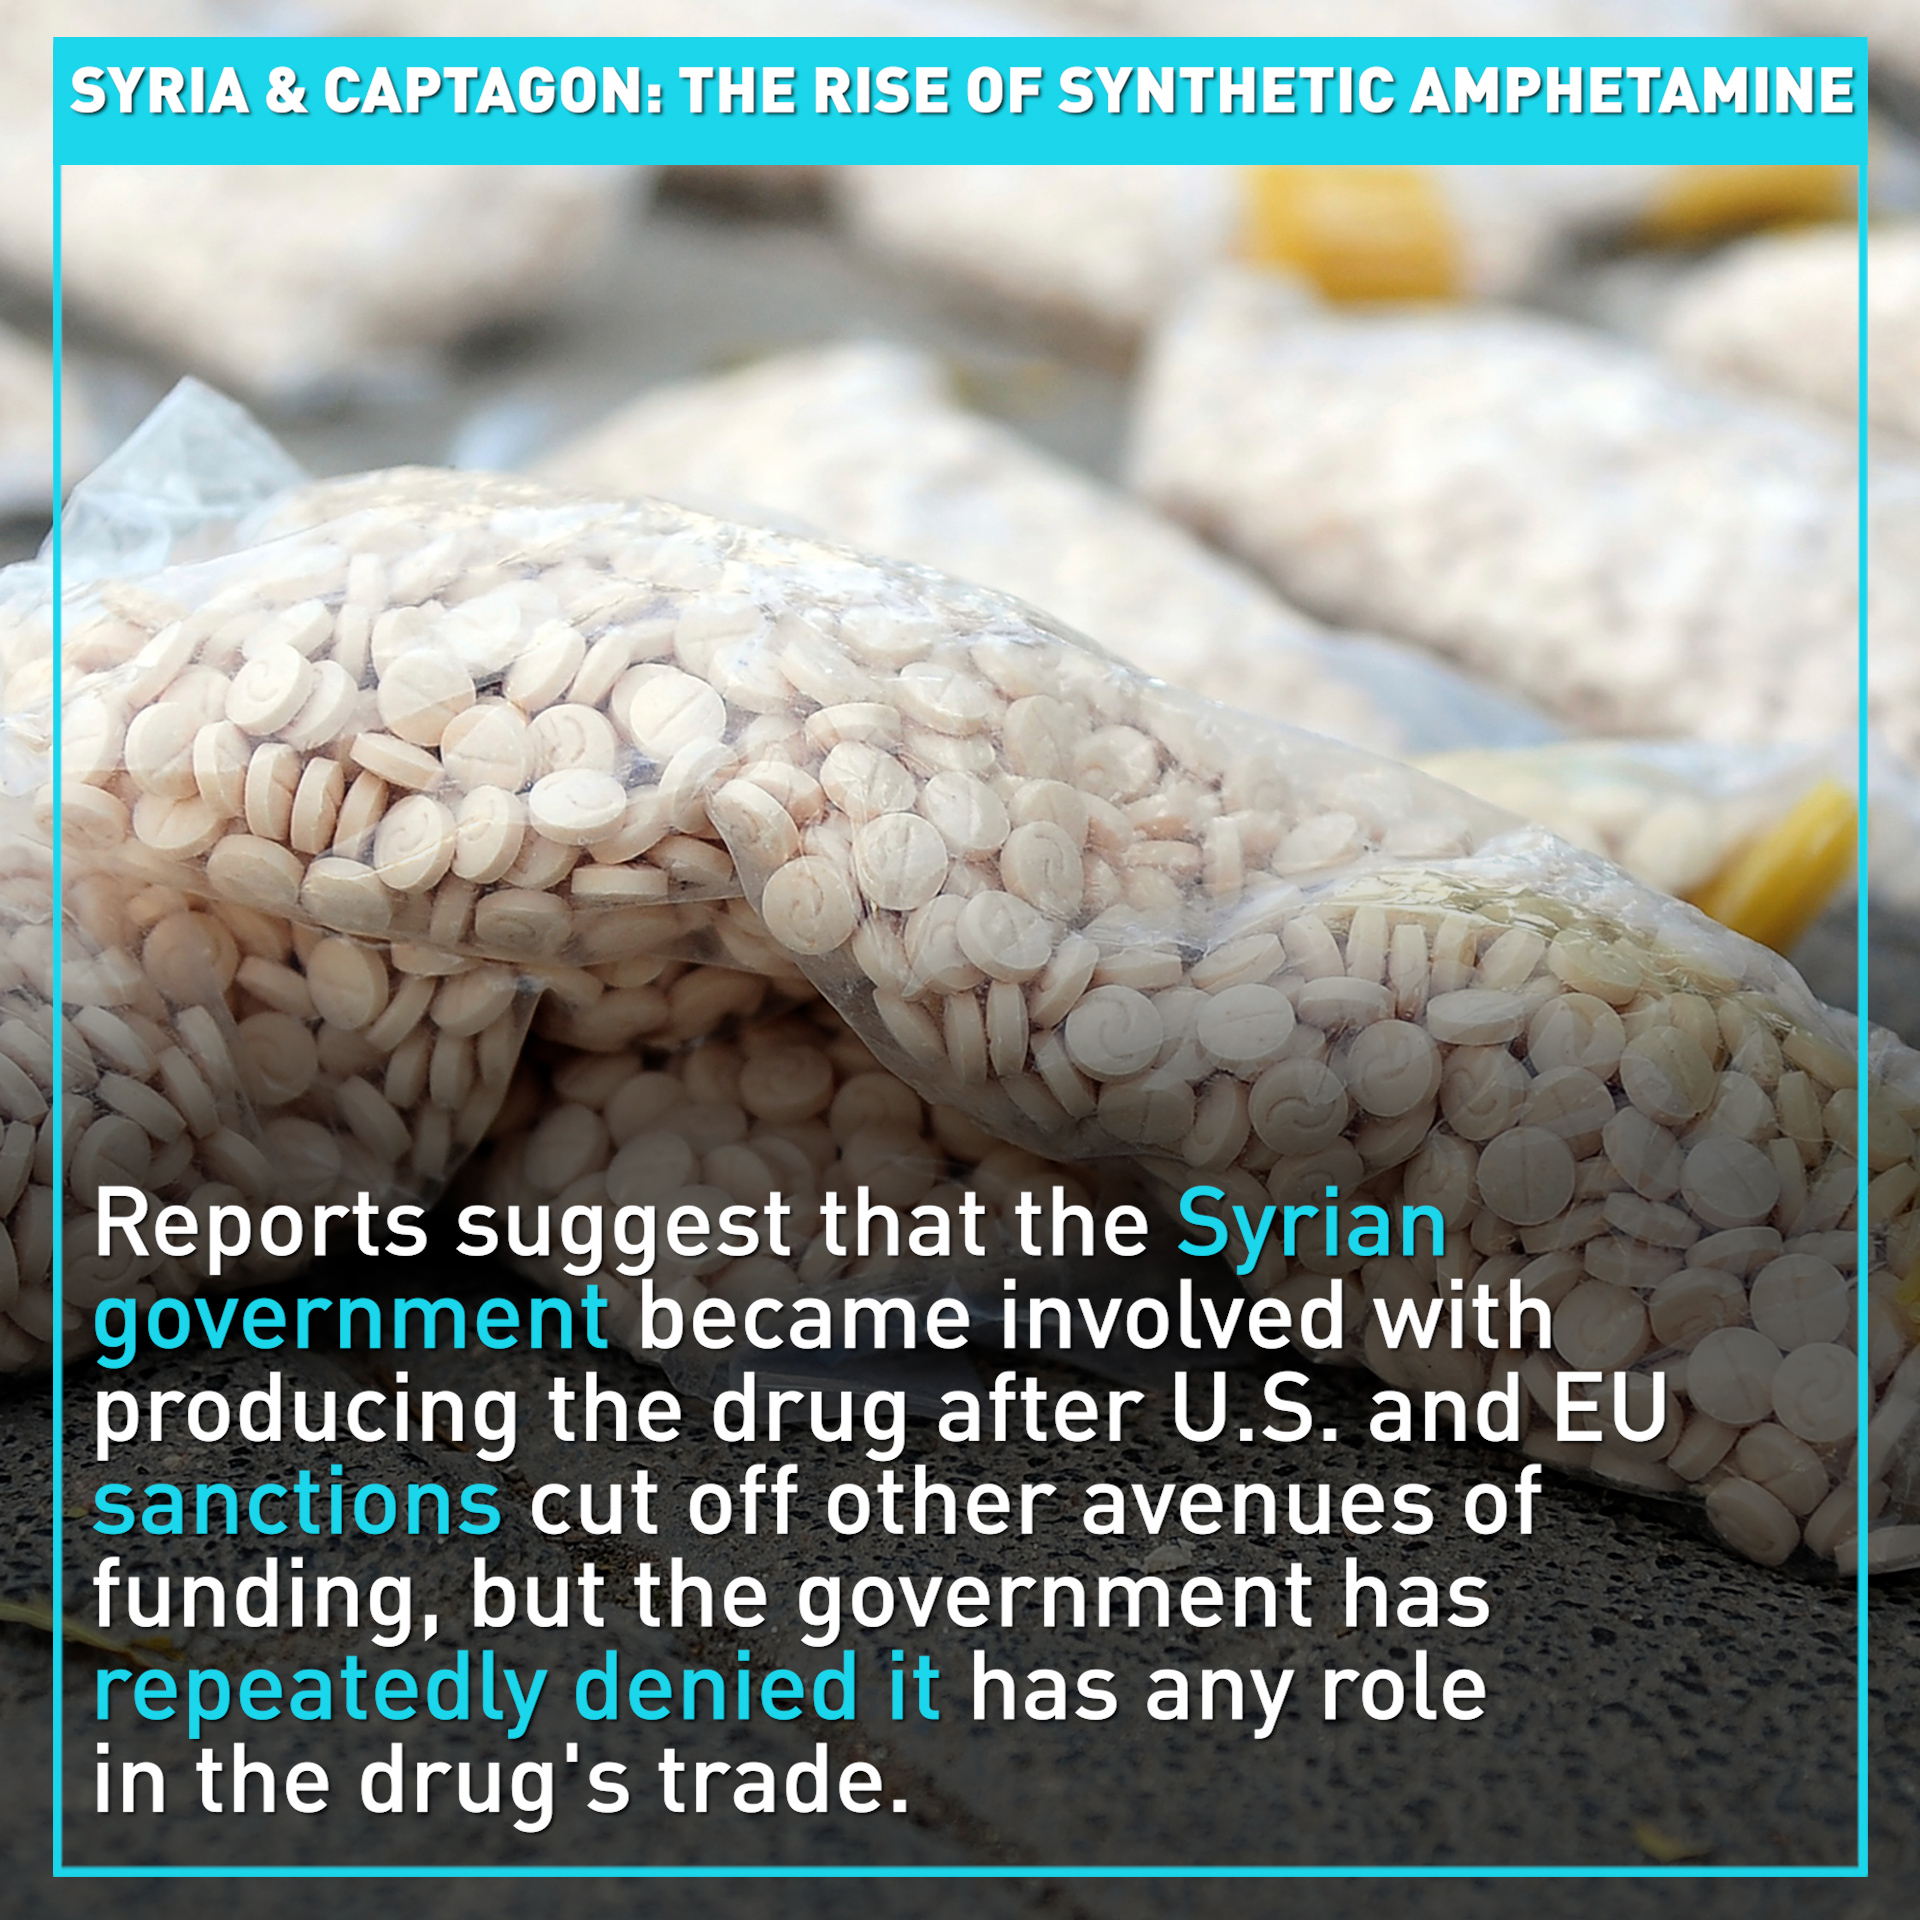 Syria and Captagon: The rise of synthetic amphetamine